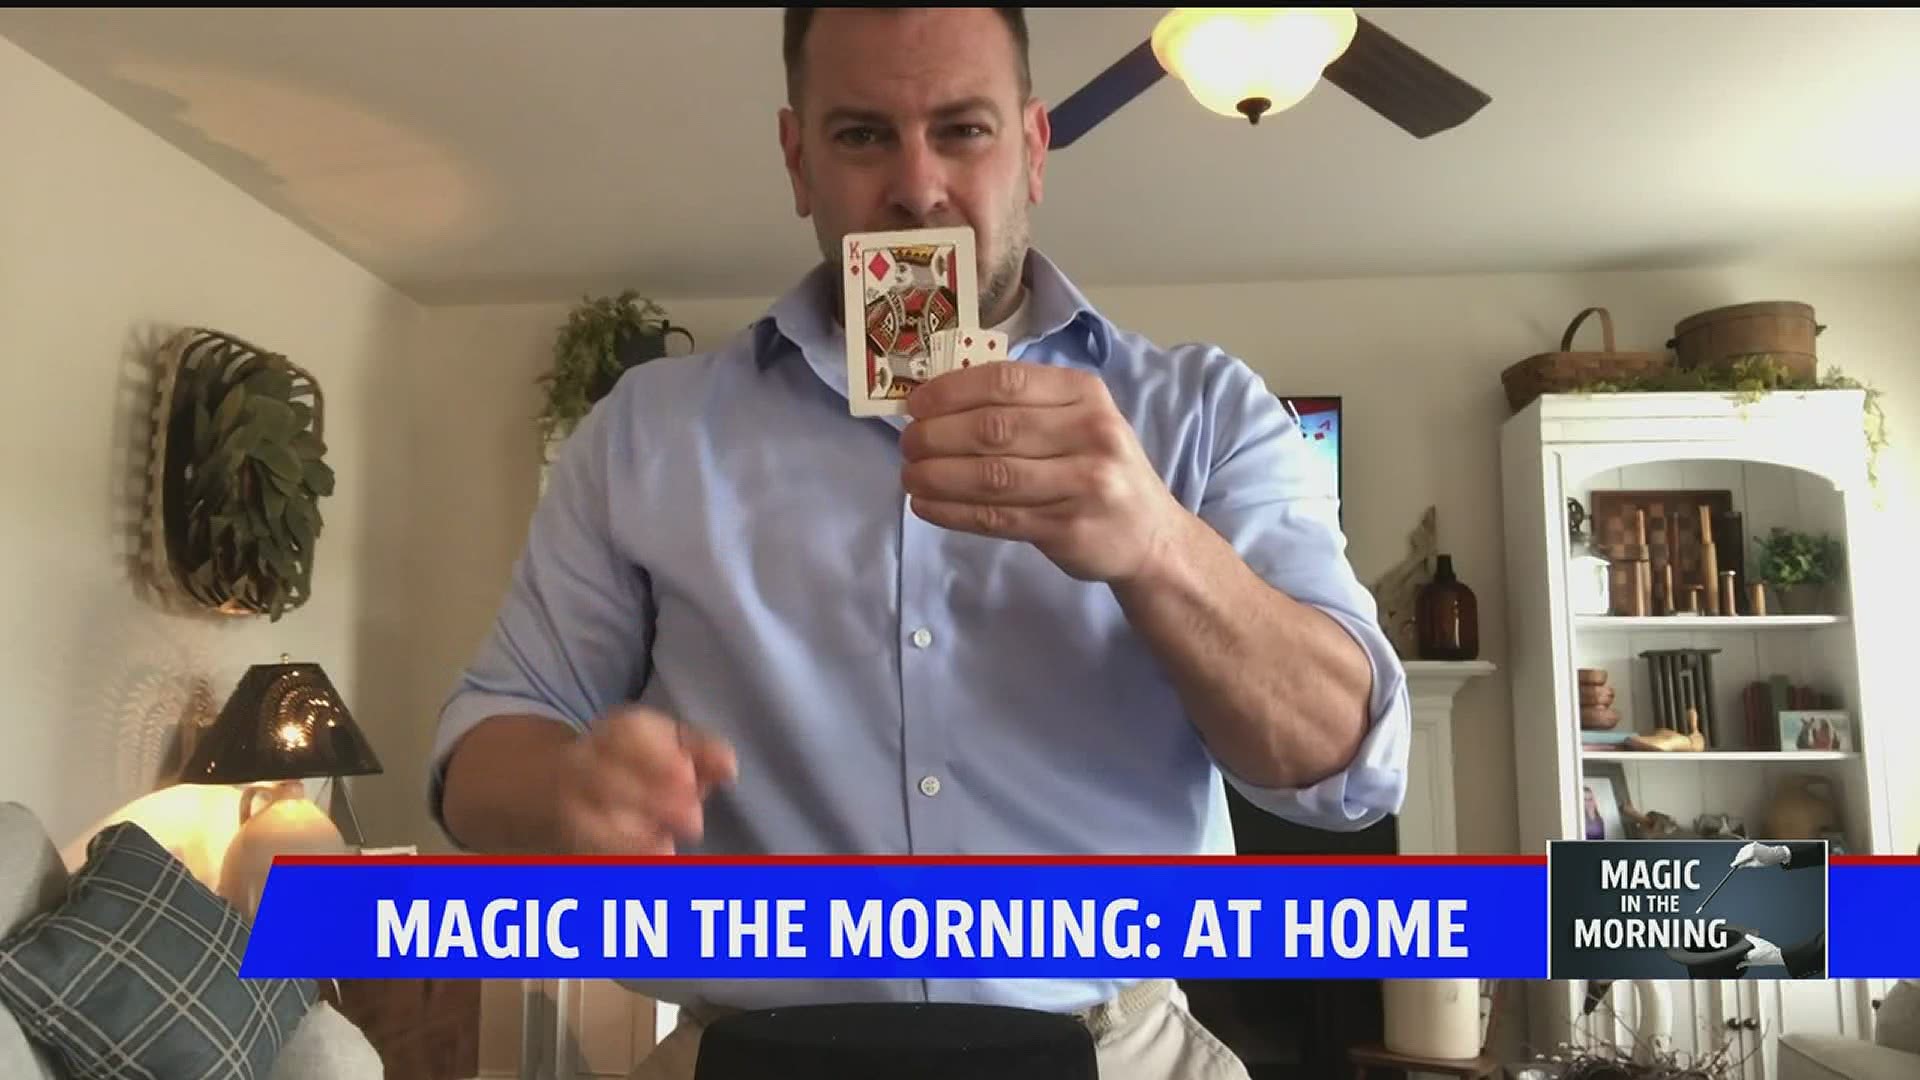 George Ripley's Magic in the Morning from Home